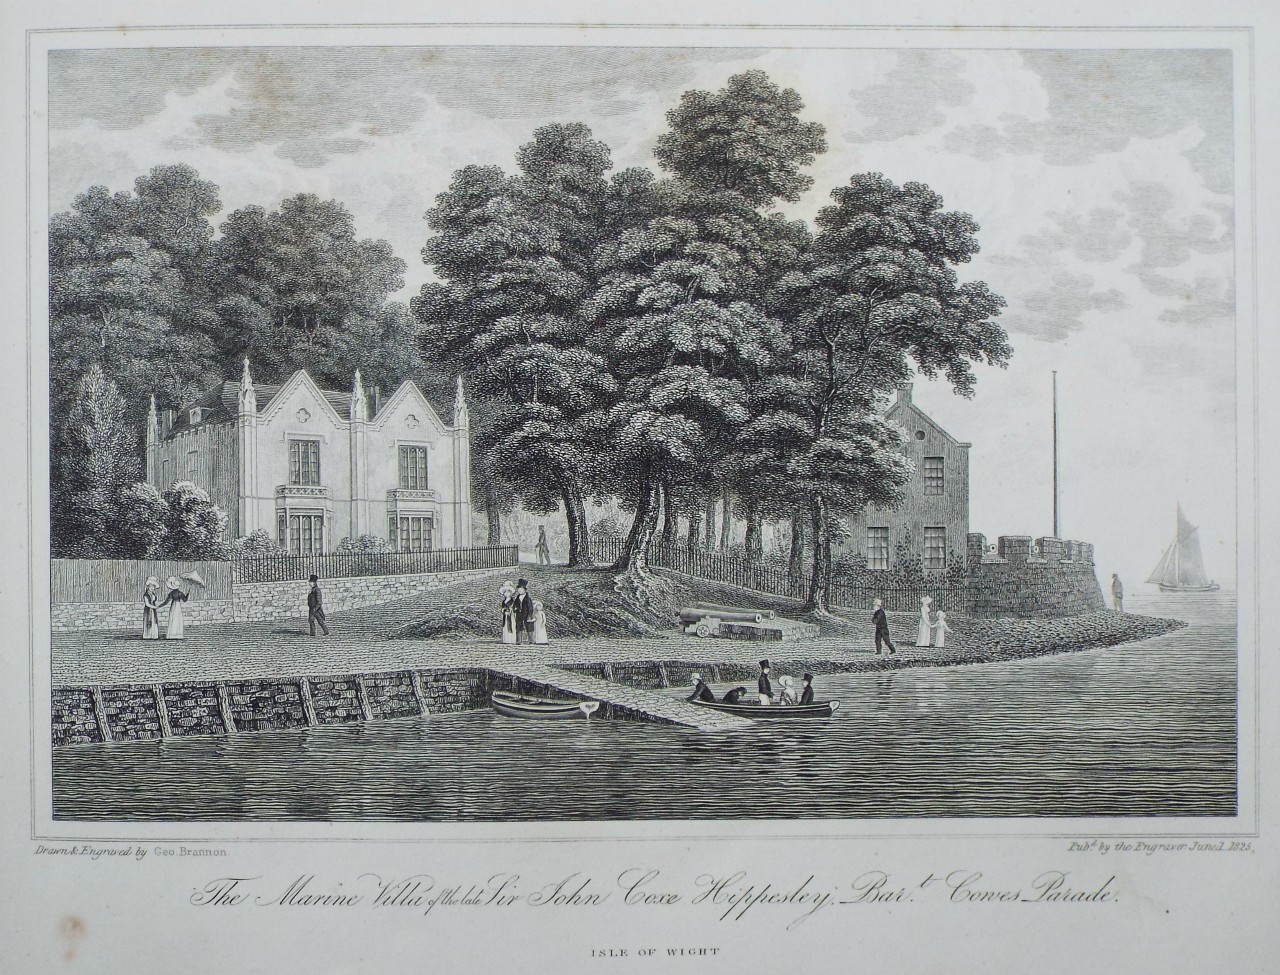 Print - The Marine Villa of the late Sir John Coxe Hippesley, Bart. Cowes Parade, Isle of Wight. - Brannon